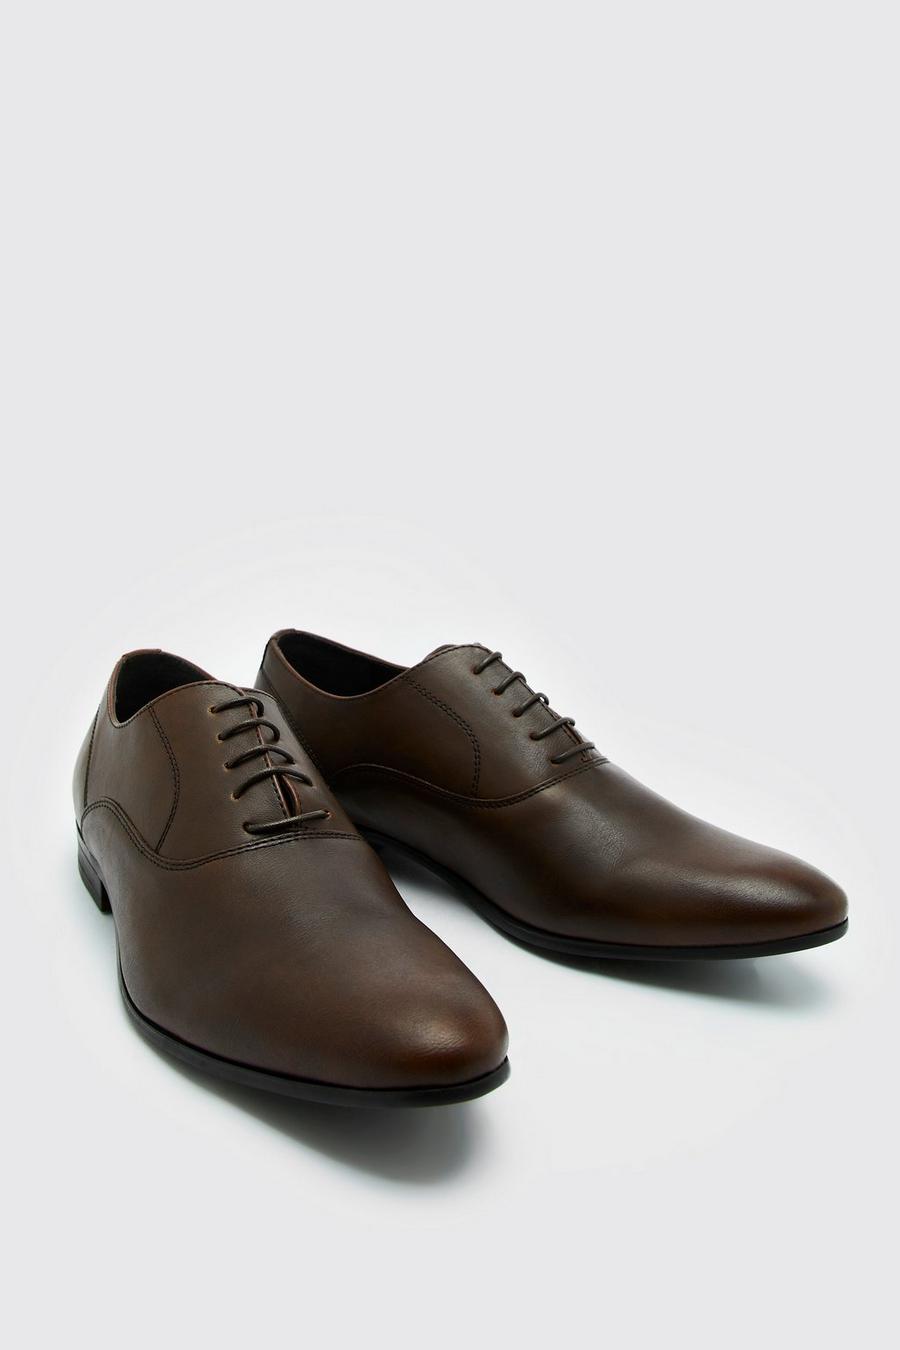 Chocolate brown Faux Leather Oxford